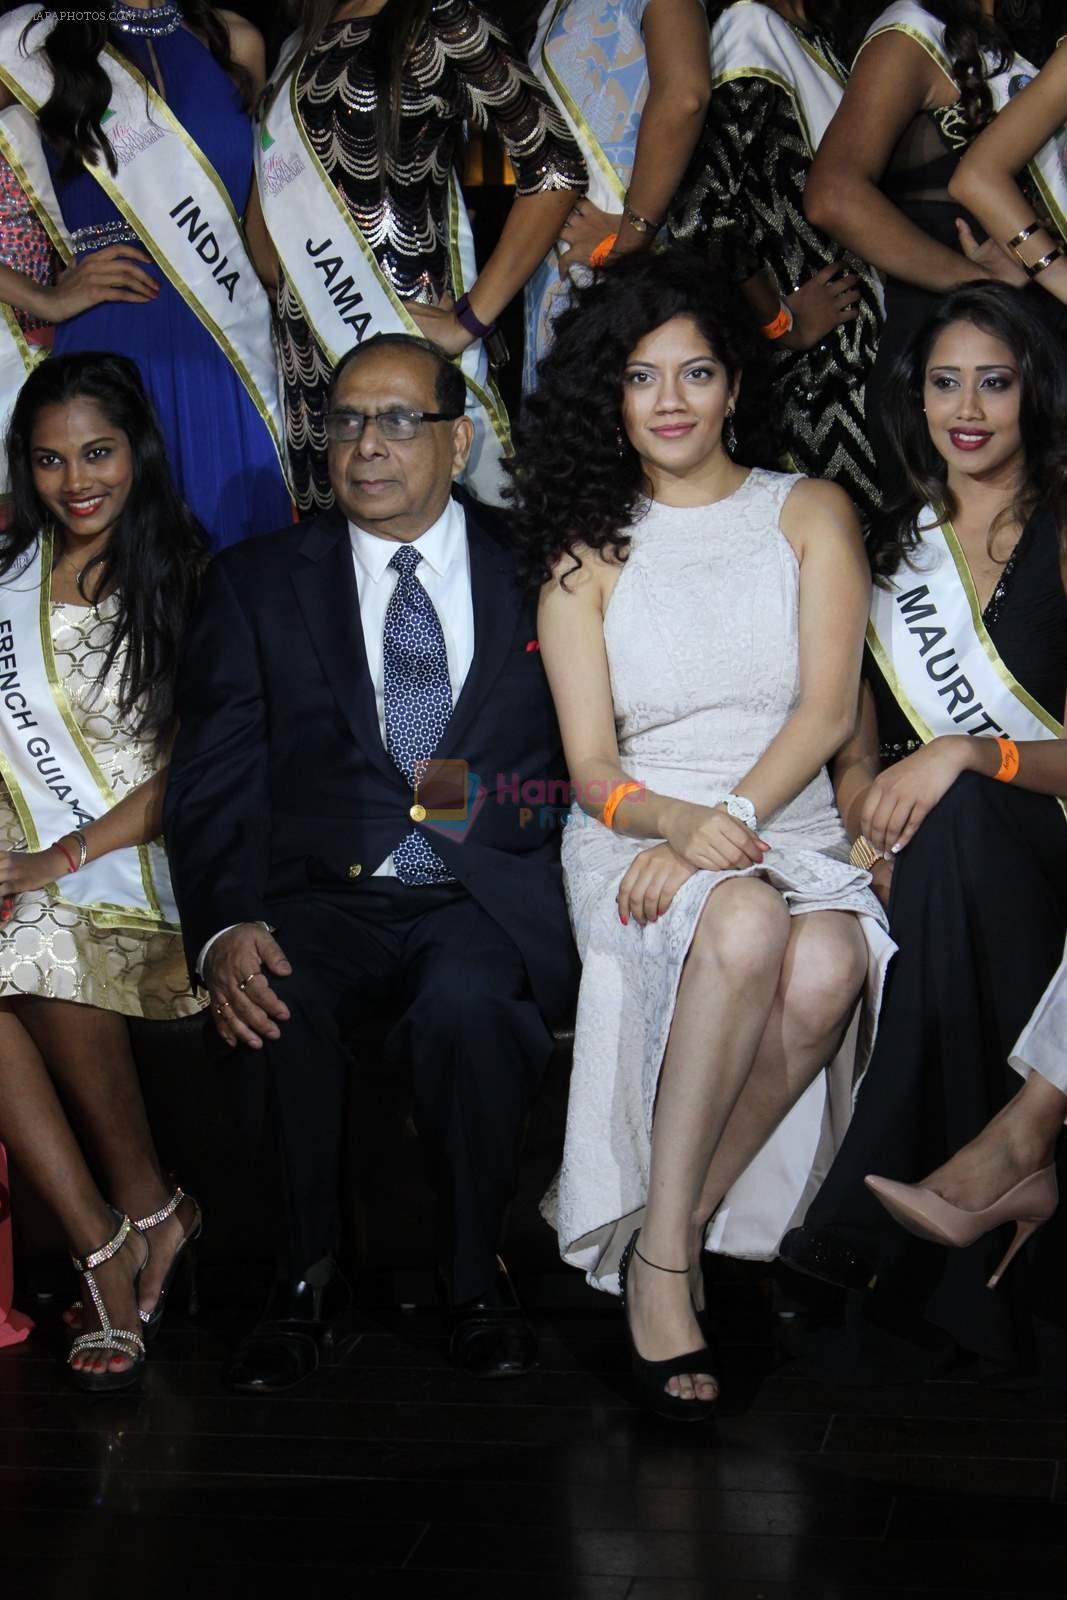 at Miss India Worldwide Bash in Lalit on 31st Aug 2015